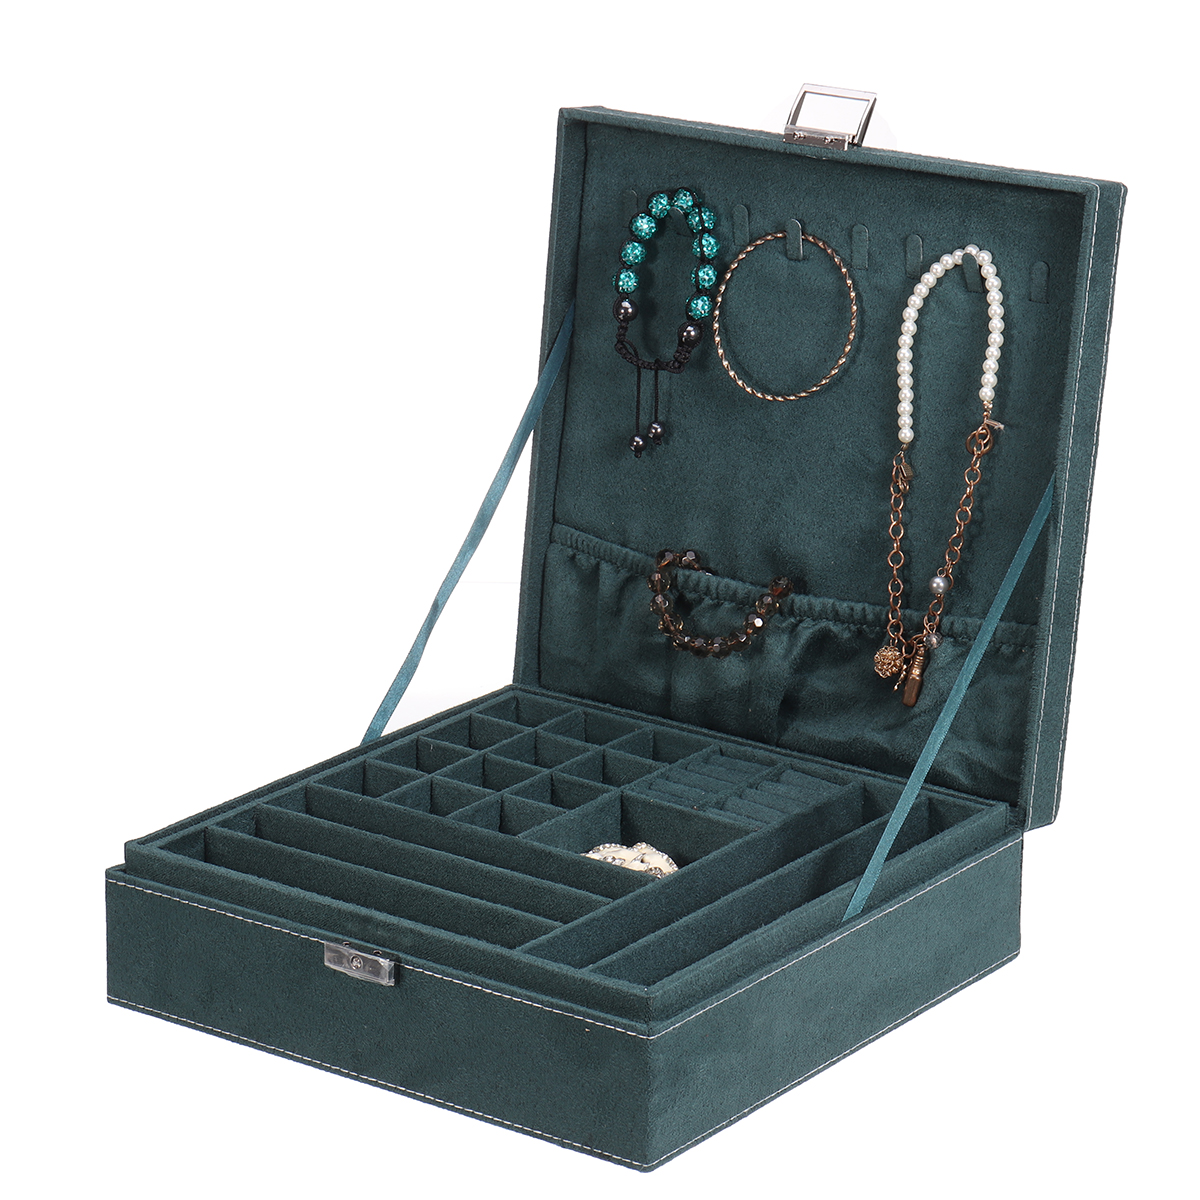 Multi-function-Vintage-Jewelry-Box-Organizers-Two-layer-Lockable-Jewelry-Display-Storage-Case-1855370-32